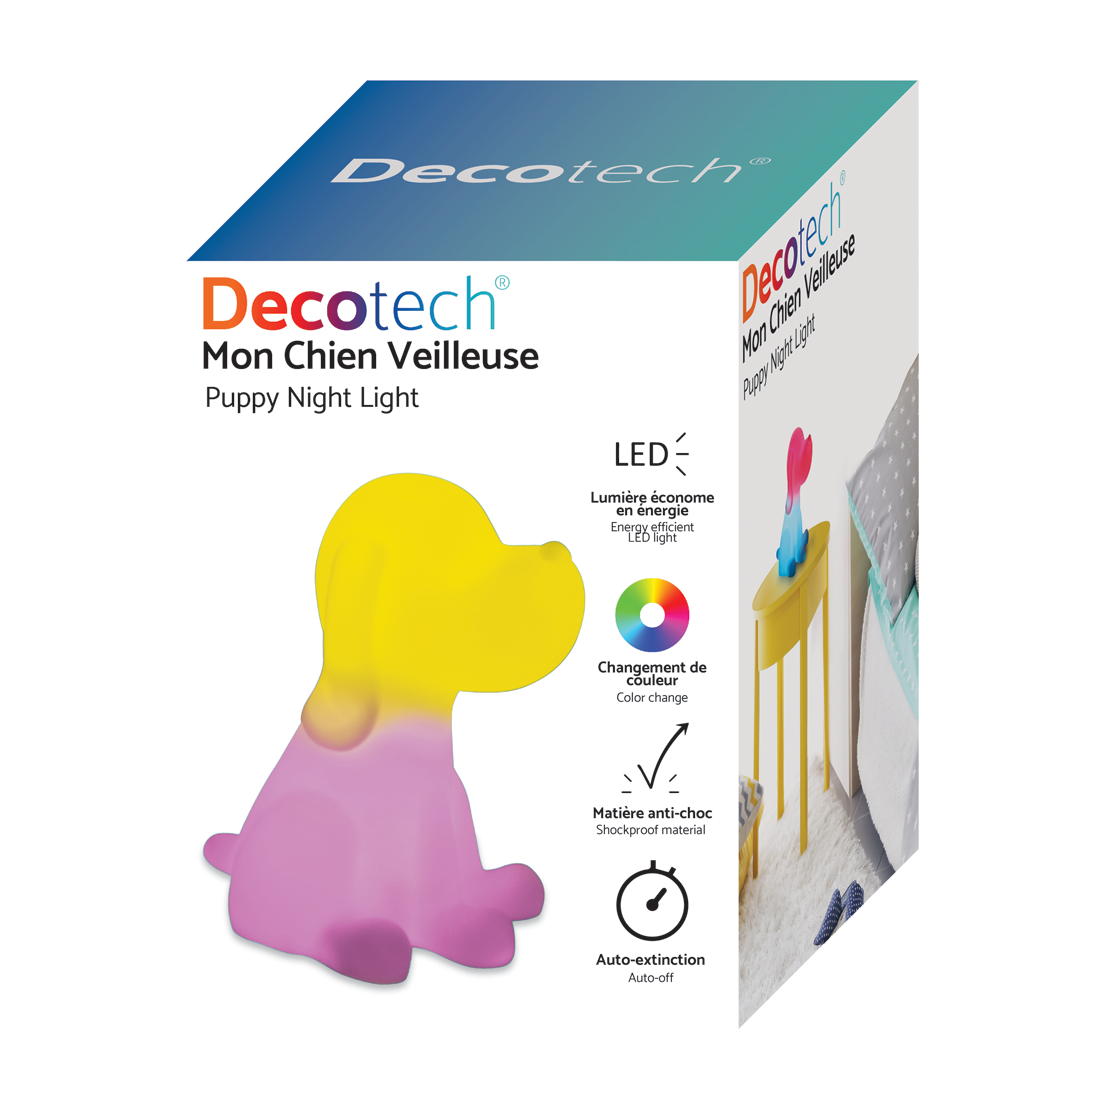 Puppy Night Light for kids room - color change, smooth light, schockproof 